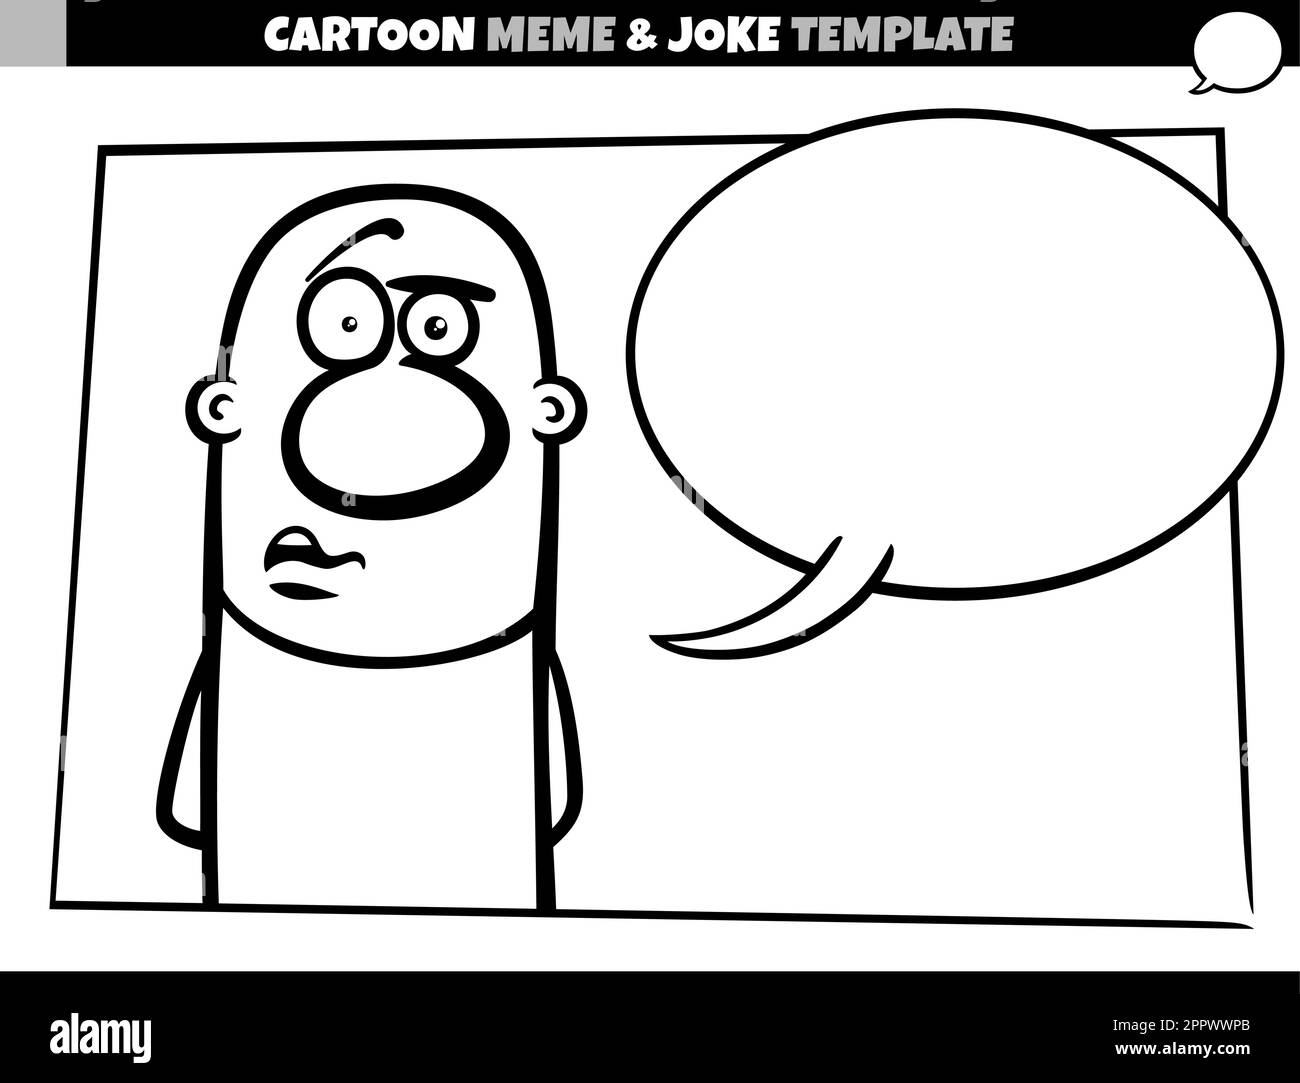 black and white cartoon meme template with comic man Stock Vector